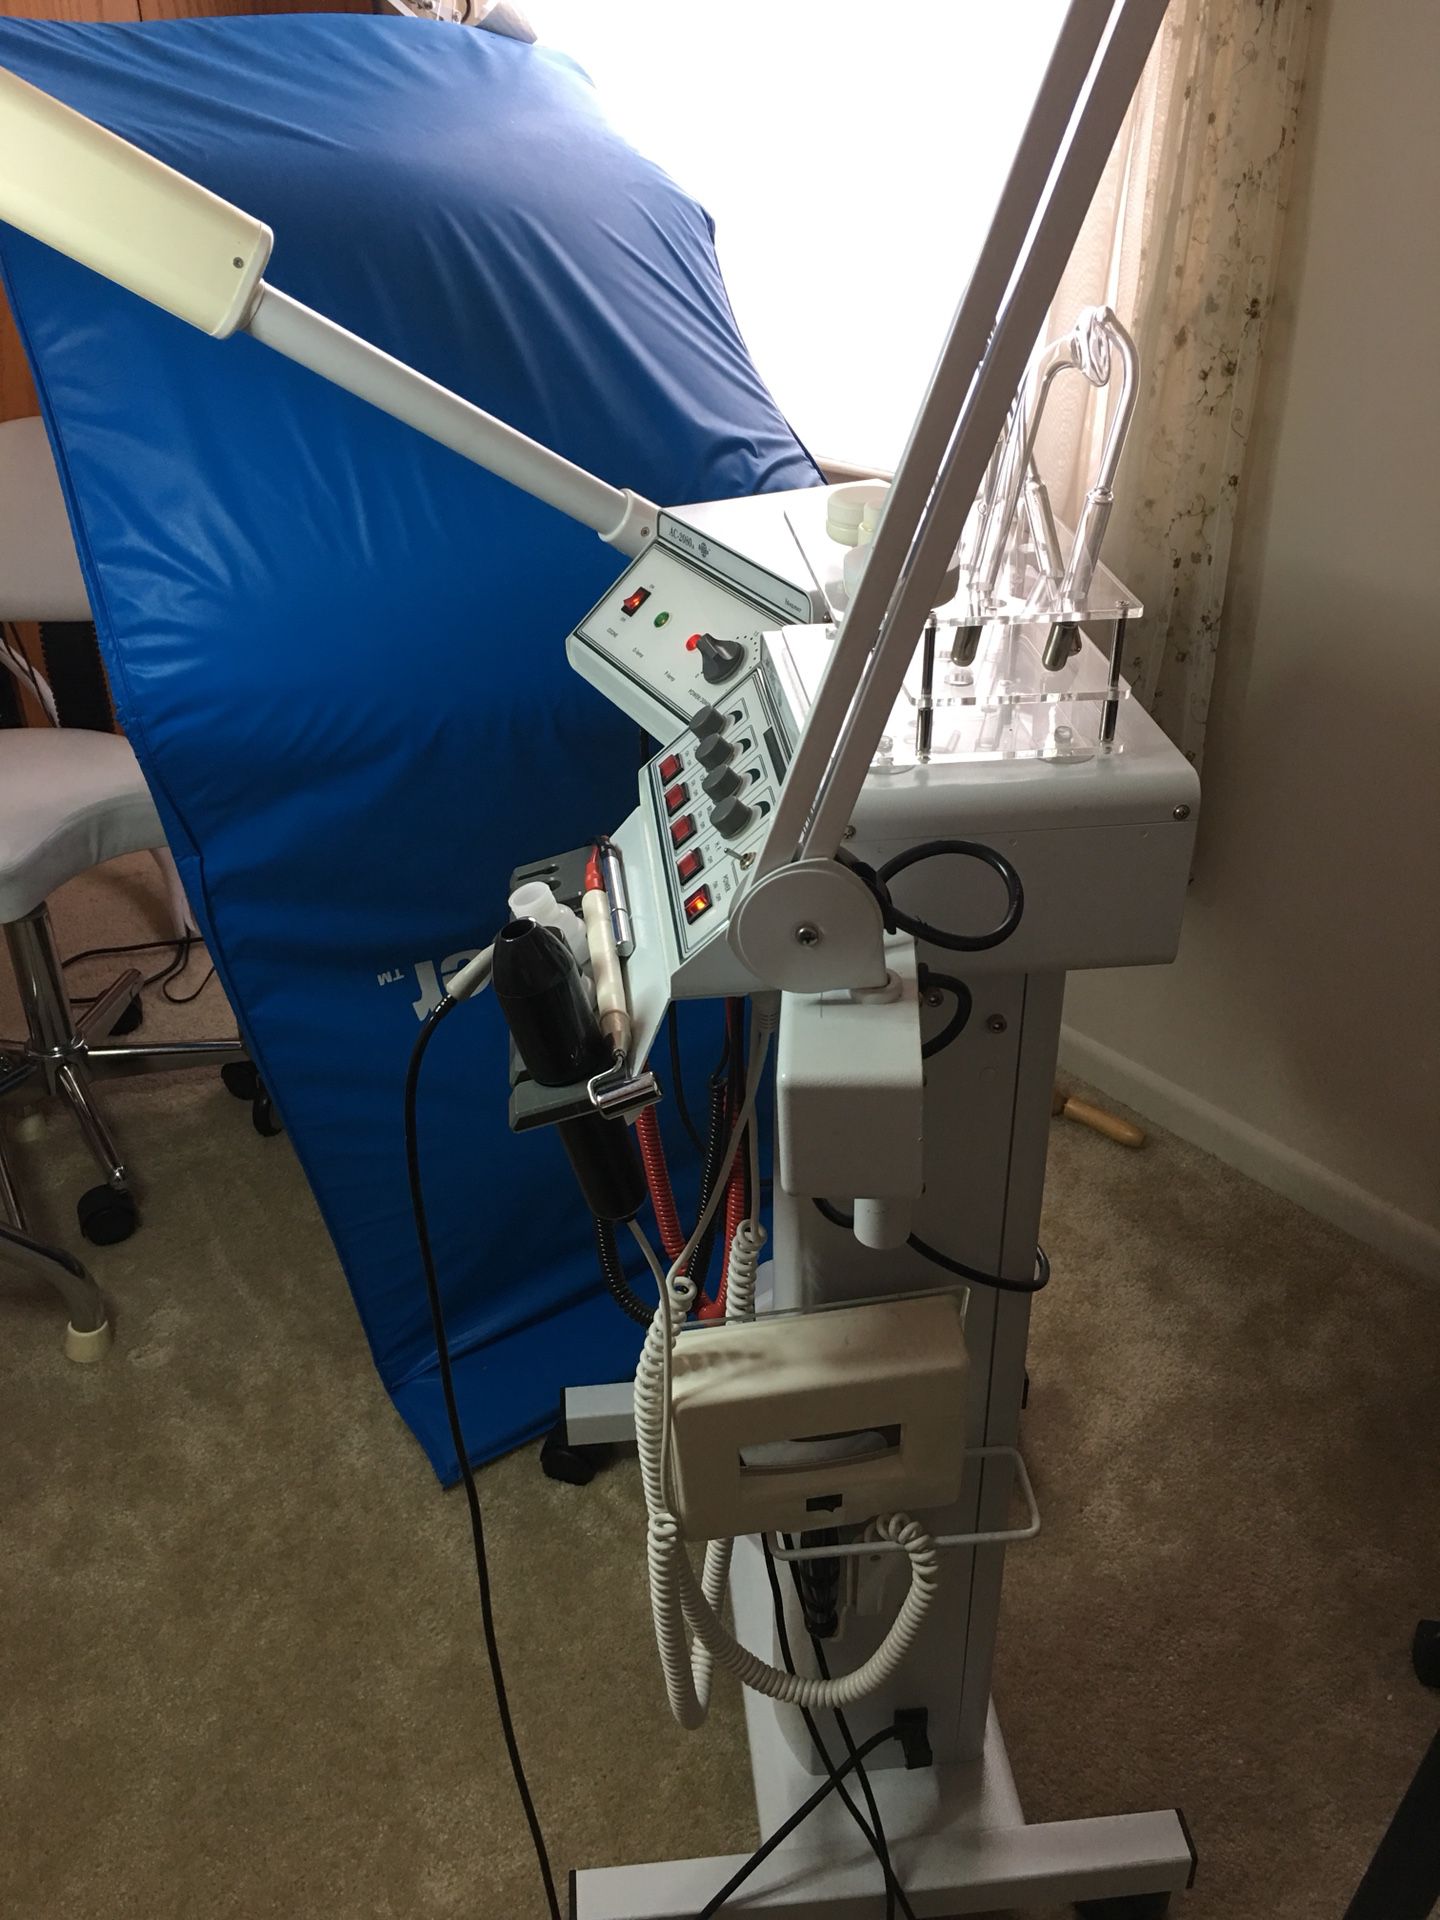 Skin care system 8 function for facial treatments $600